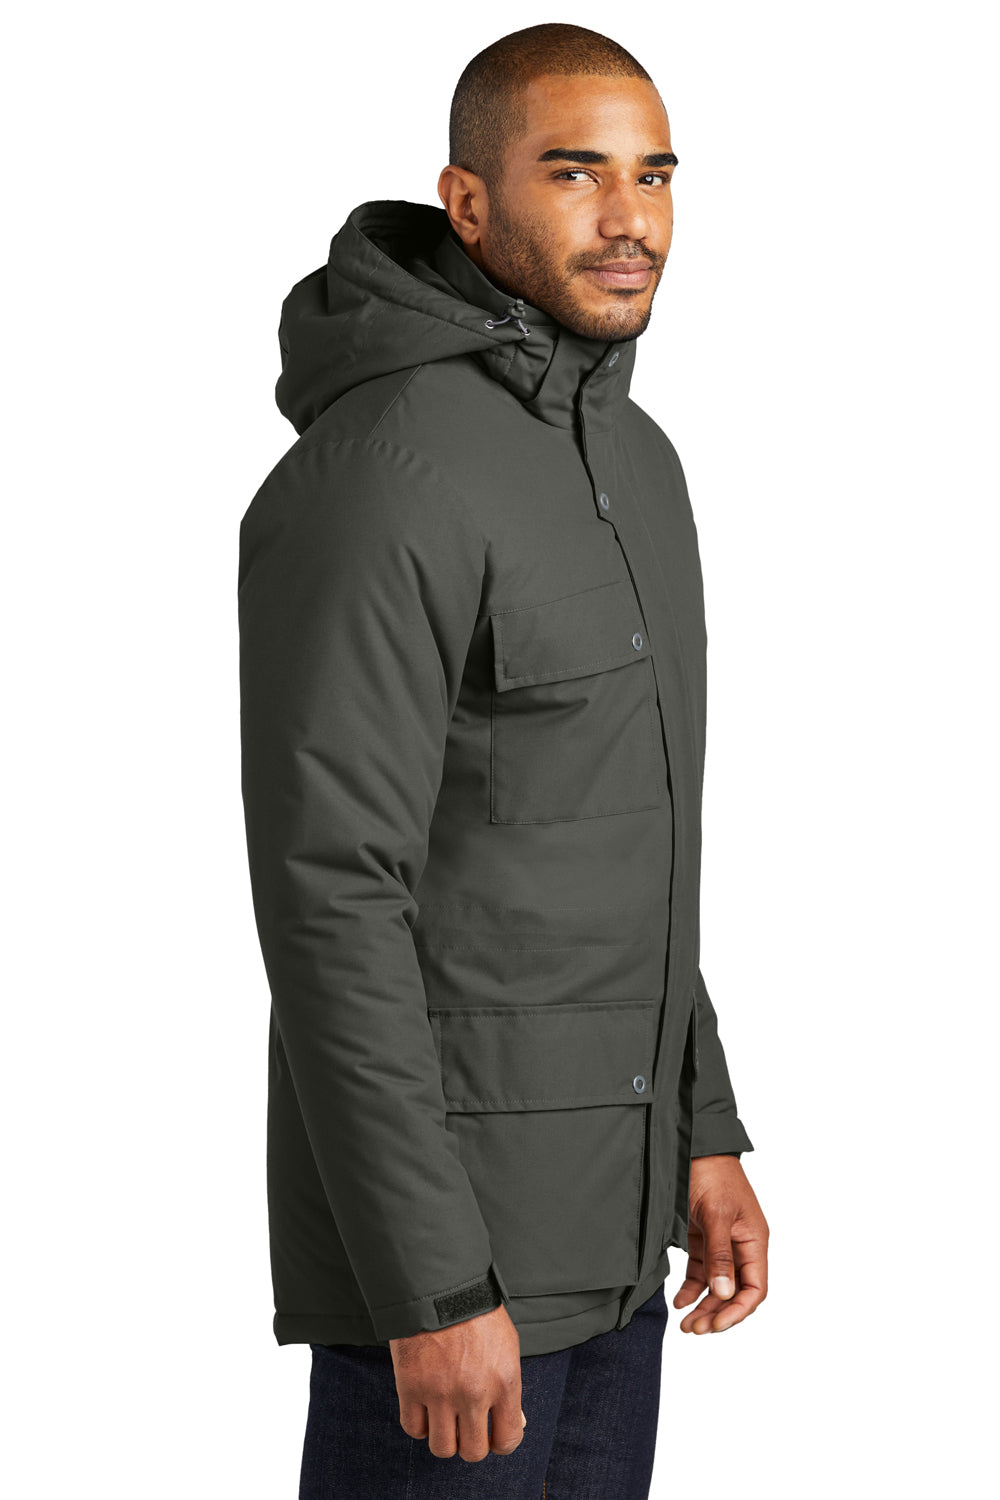 Port Authority J599 Mens Excursion Full Zip Hooded Parka Storm Grey Side